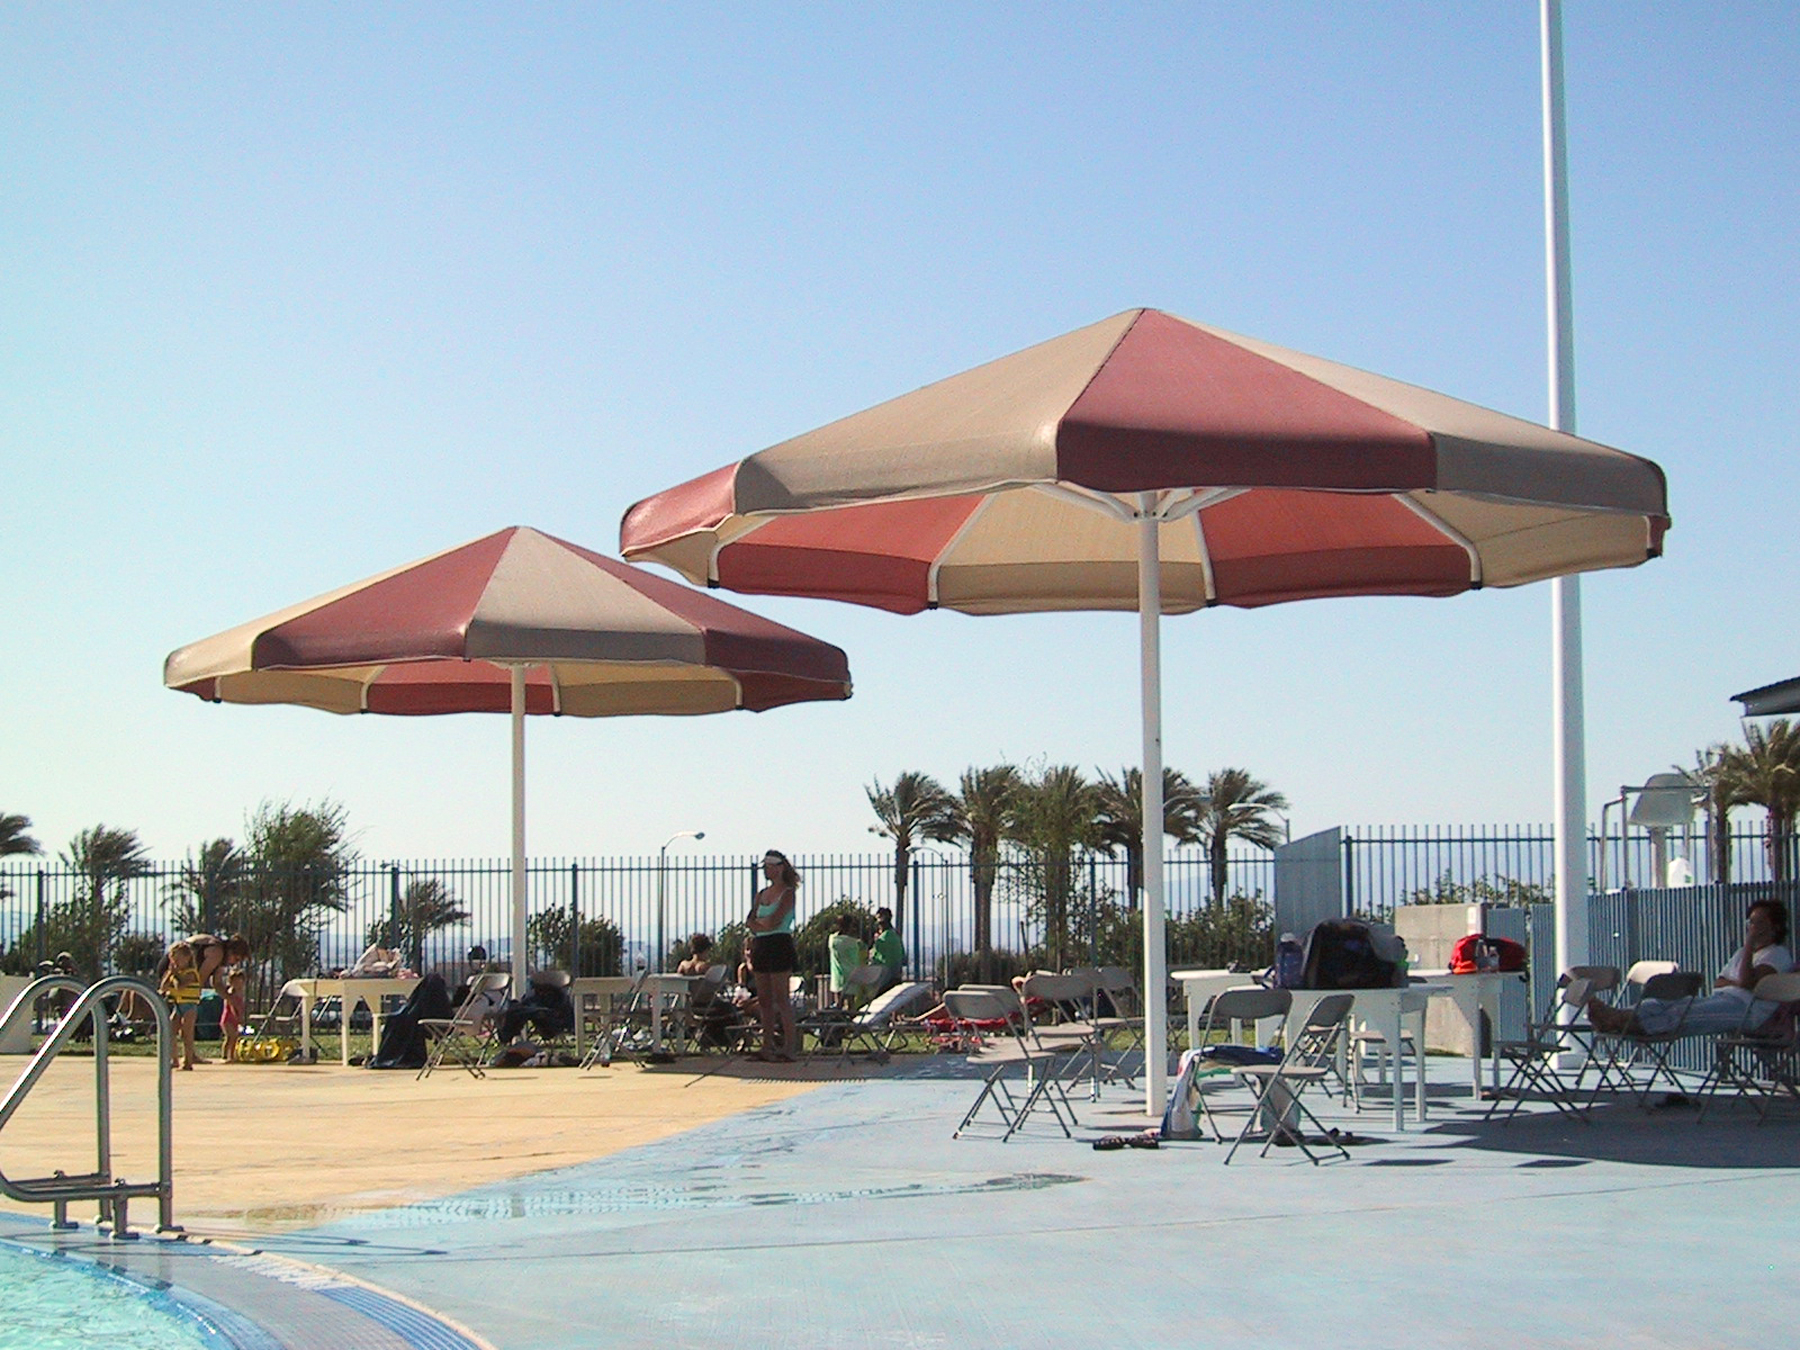 shades covering seating area next to pool